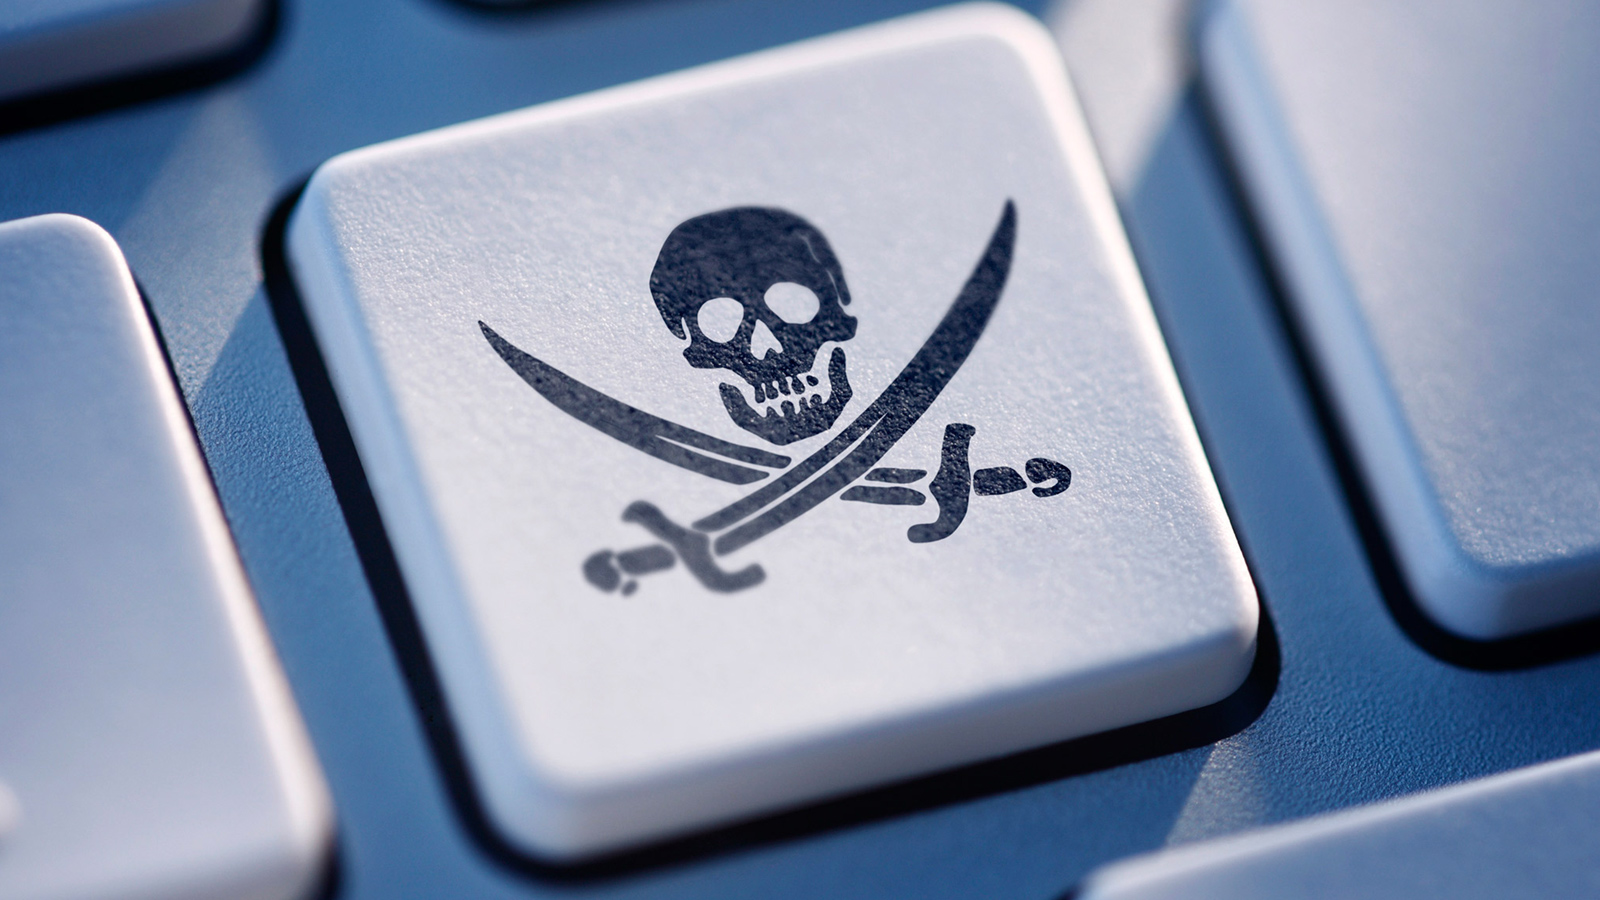 Five Individuals Indicted by Department of Justice for Piracy